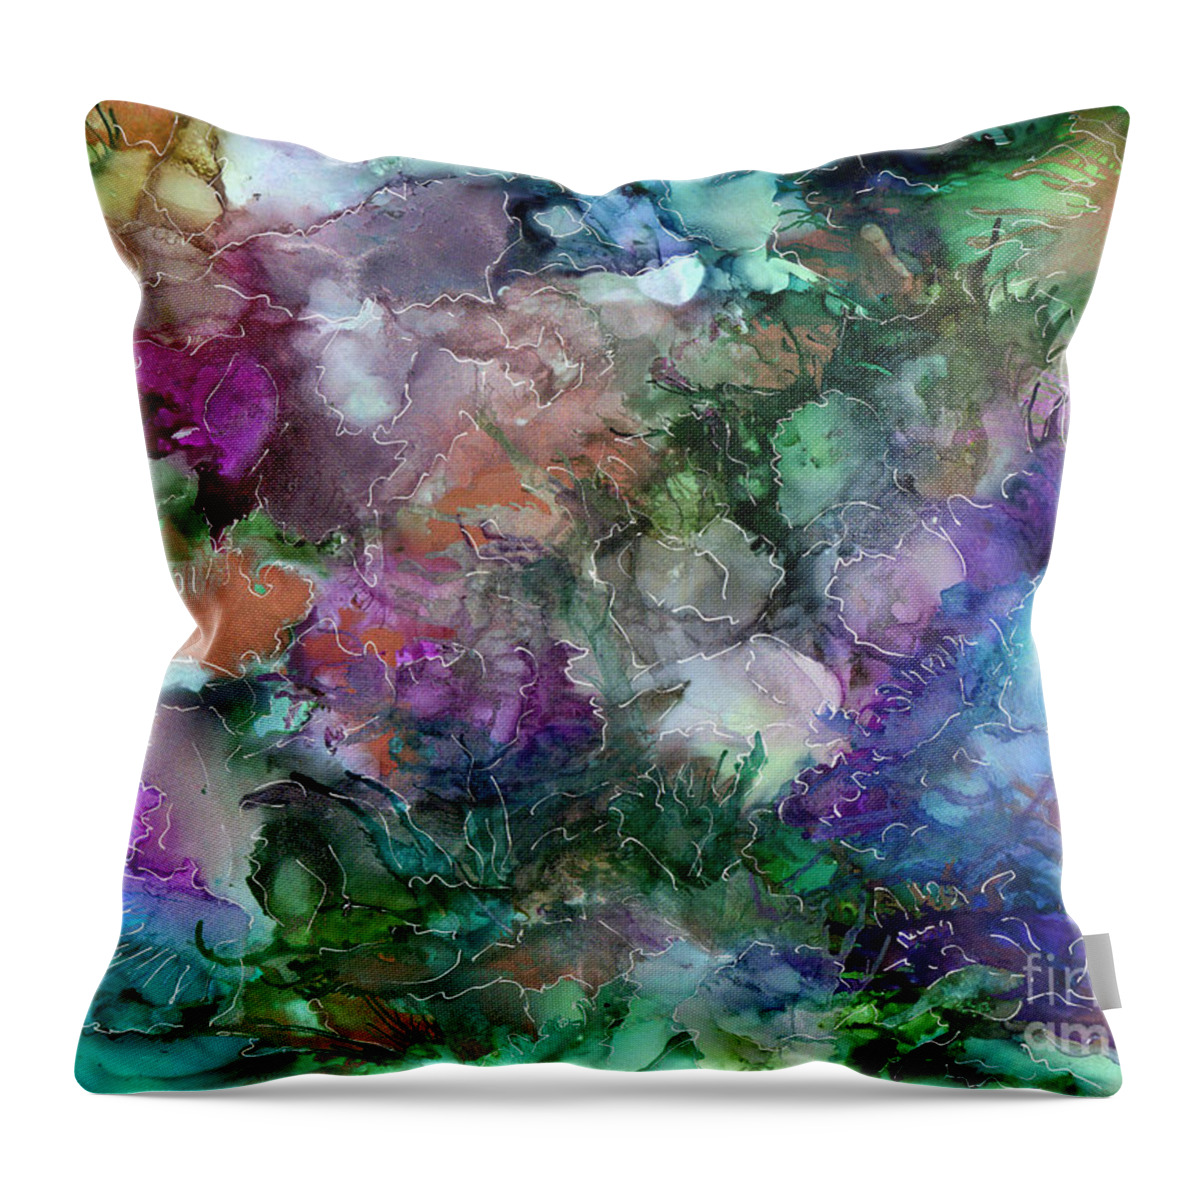 Great Barrier Reef Throw Pillow featuring the painting Great Barrier Reef by Eunice Warfel